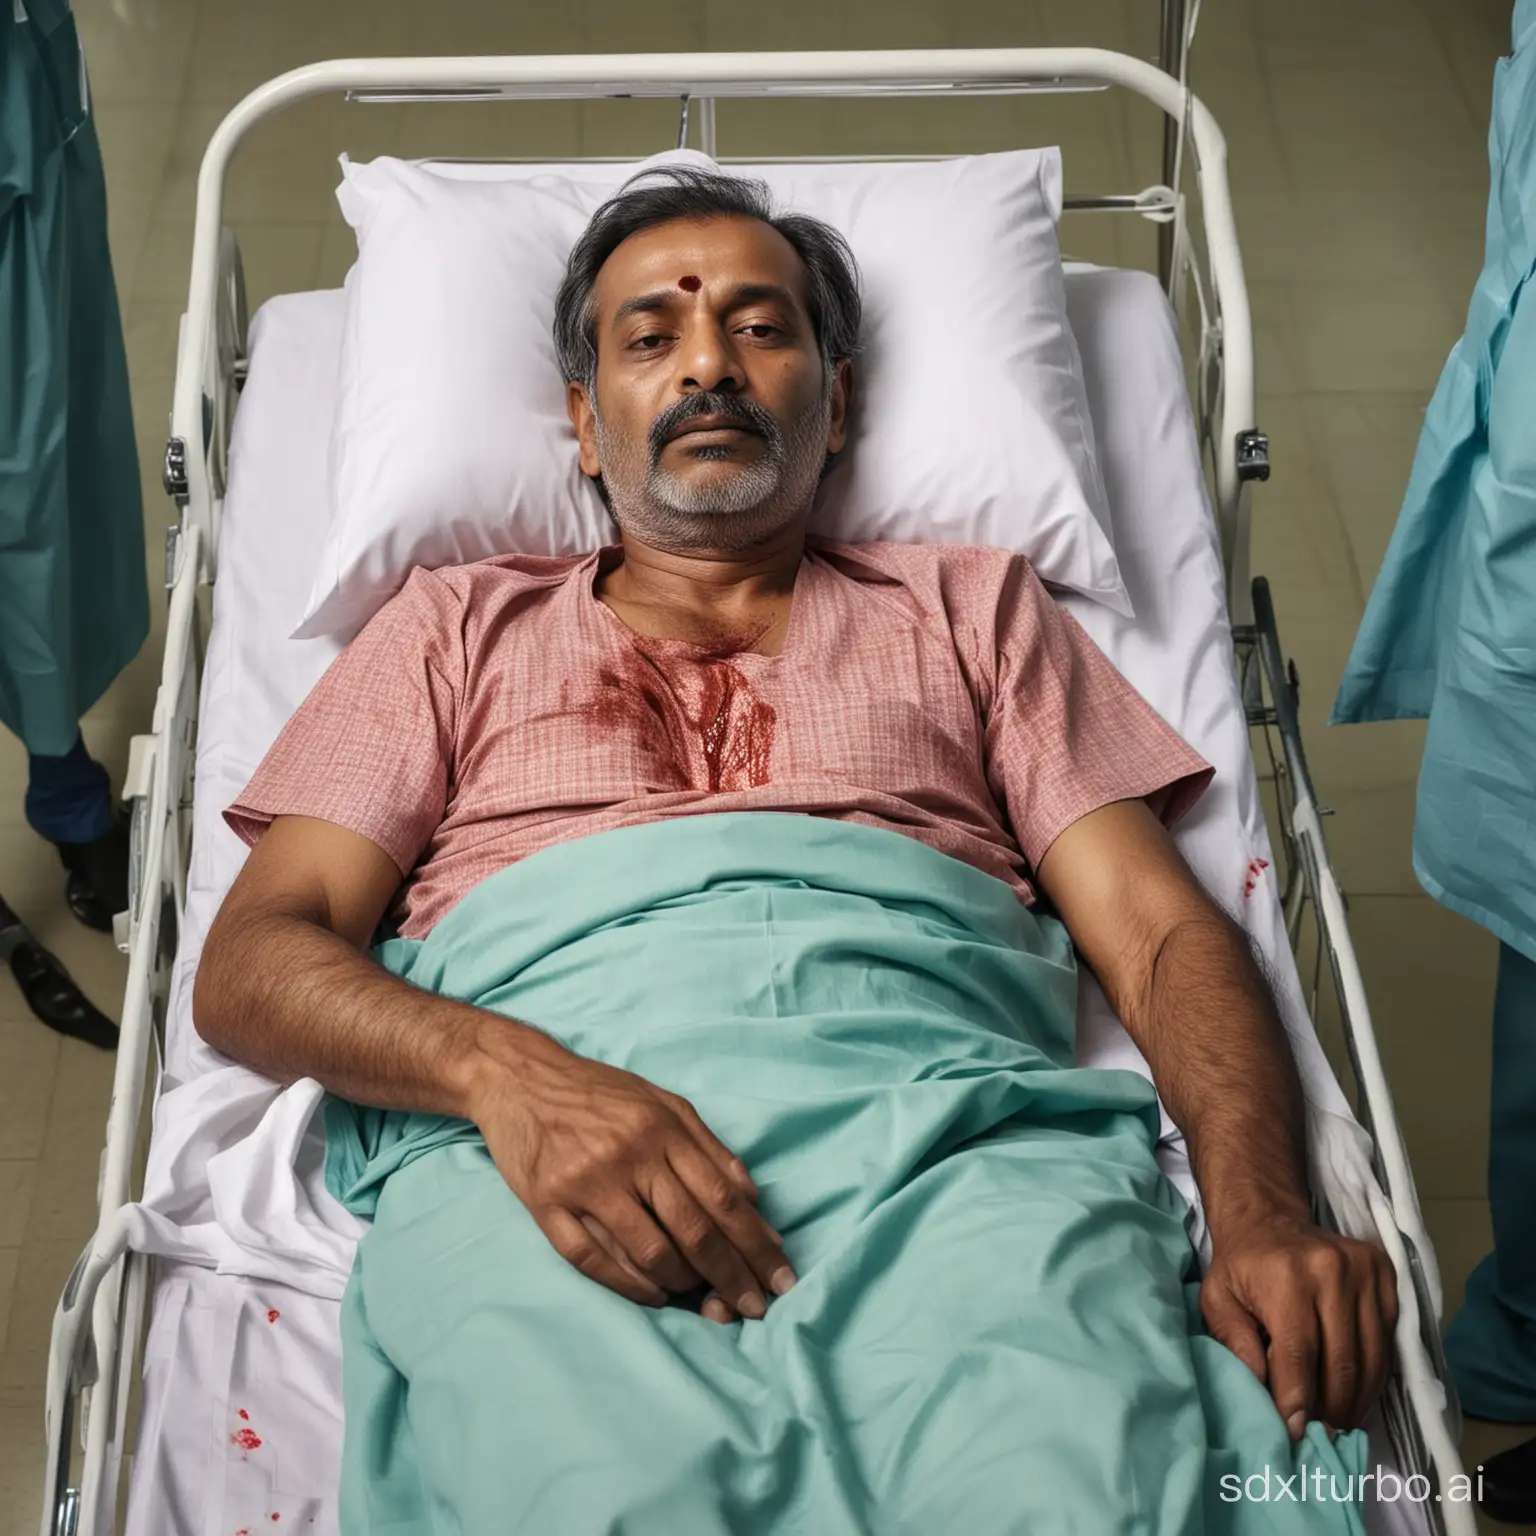 60 years old indian middle class man as patient, in hospital stretcher, with blood loss, unconsciously, in Hospital entrance